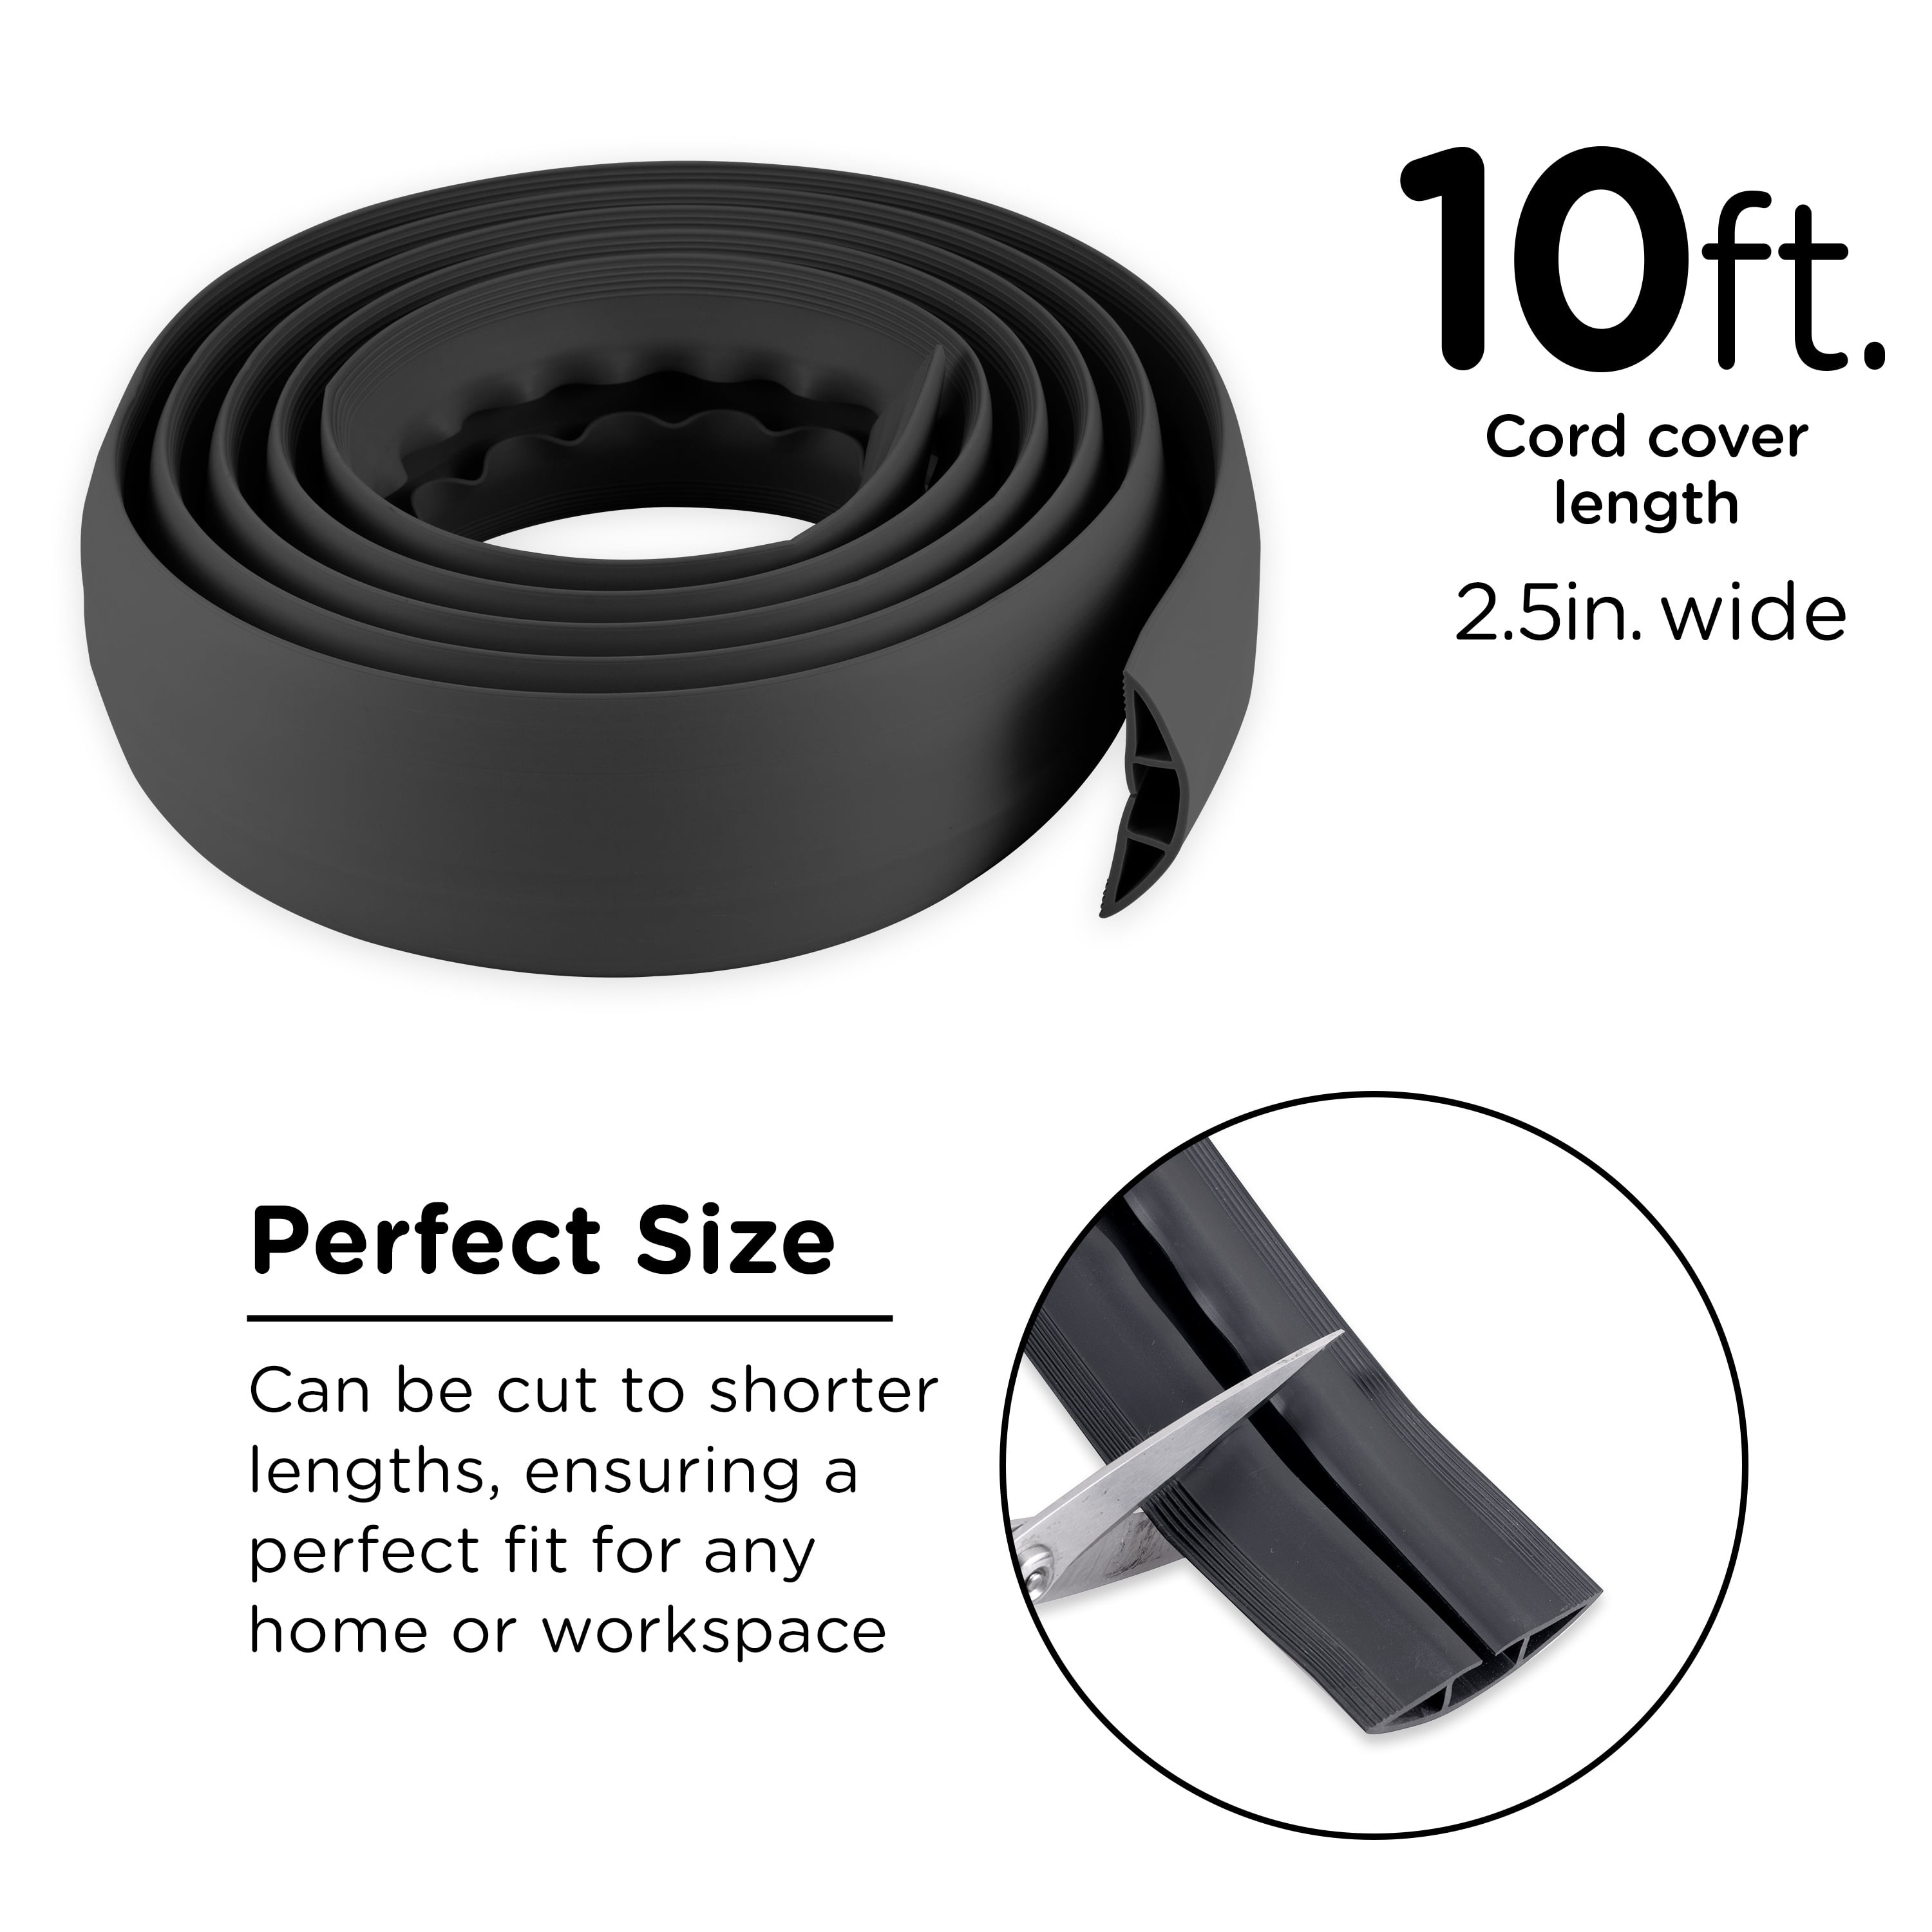 Eapele 10 ft Floor Cord Cover Heavy Duty Cable Protector, Easy to Unroll,  Prevent Trip Hazard for Home Office or Outdoor Settings (Black)